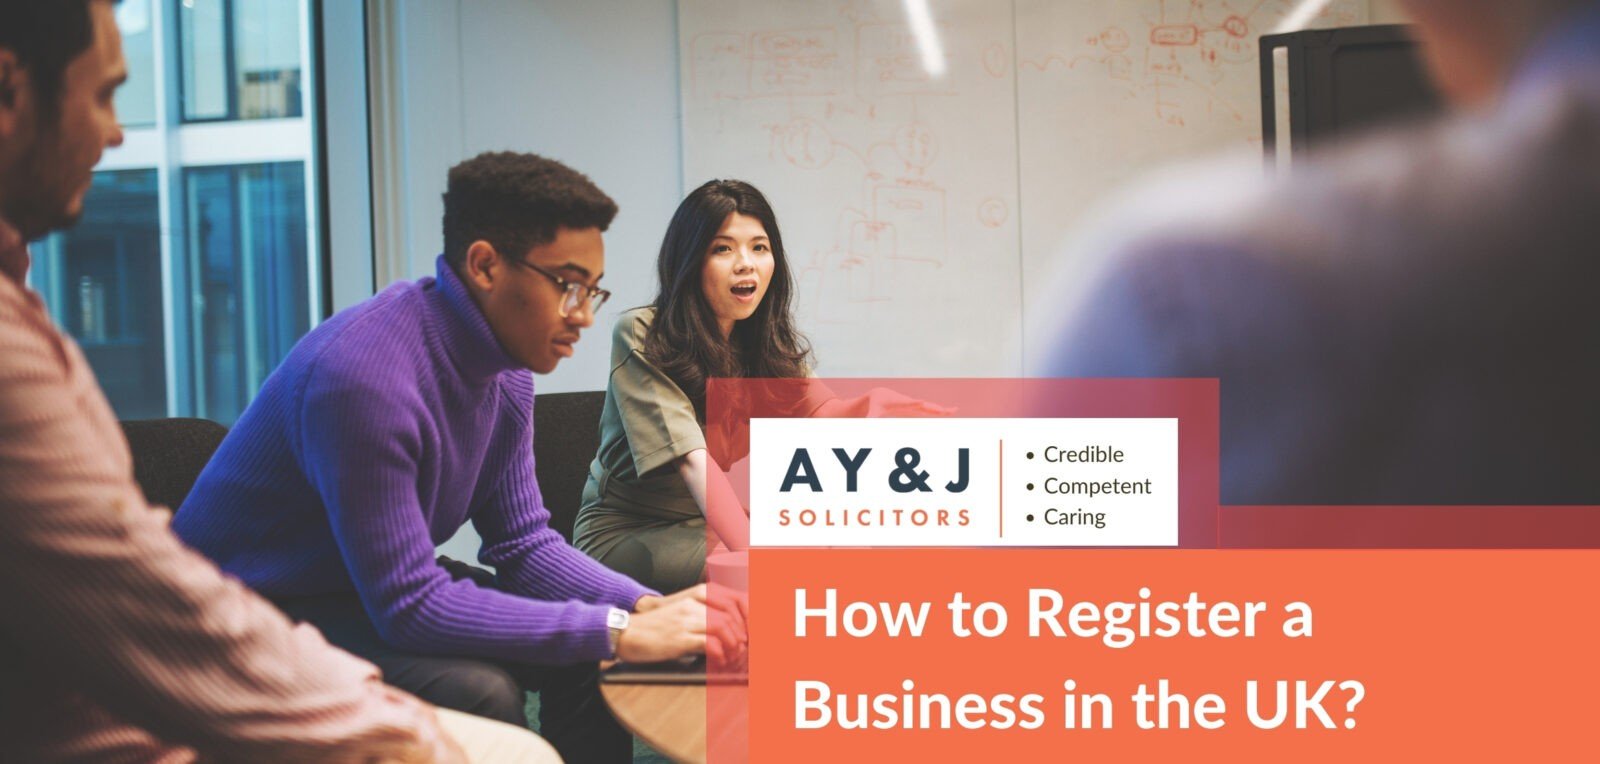 How to Register a Business in the UK? | A Y & J Solicitors